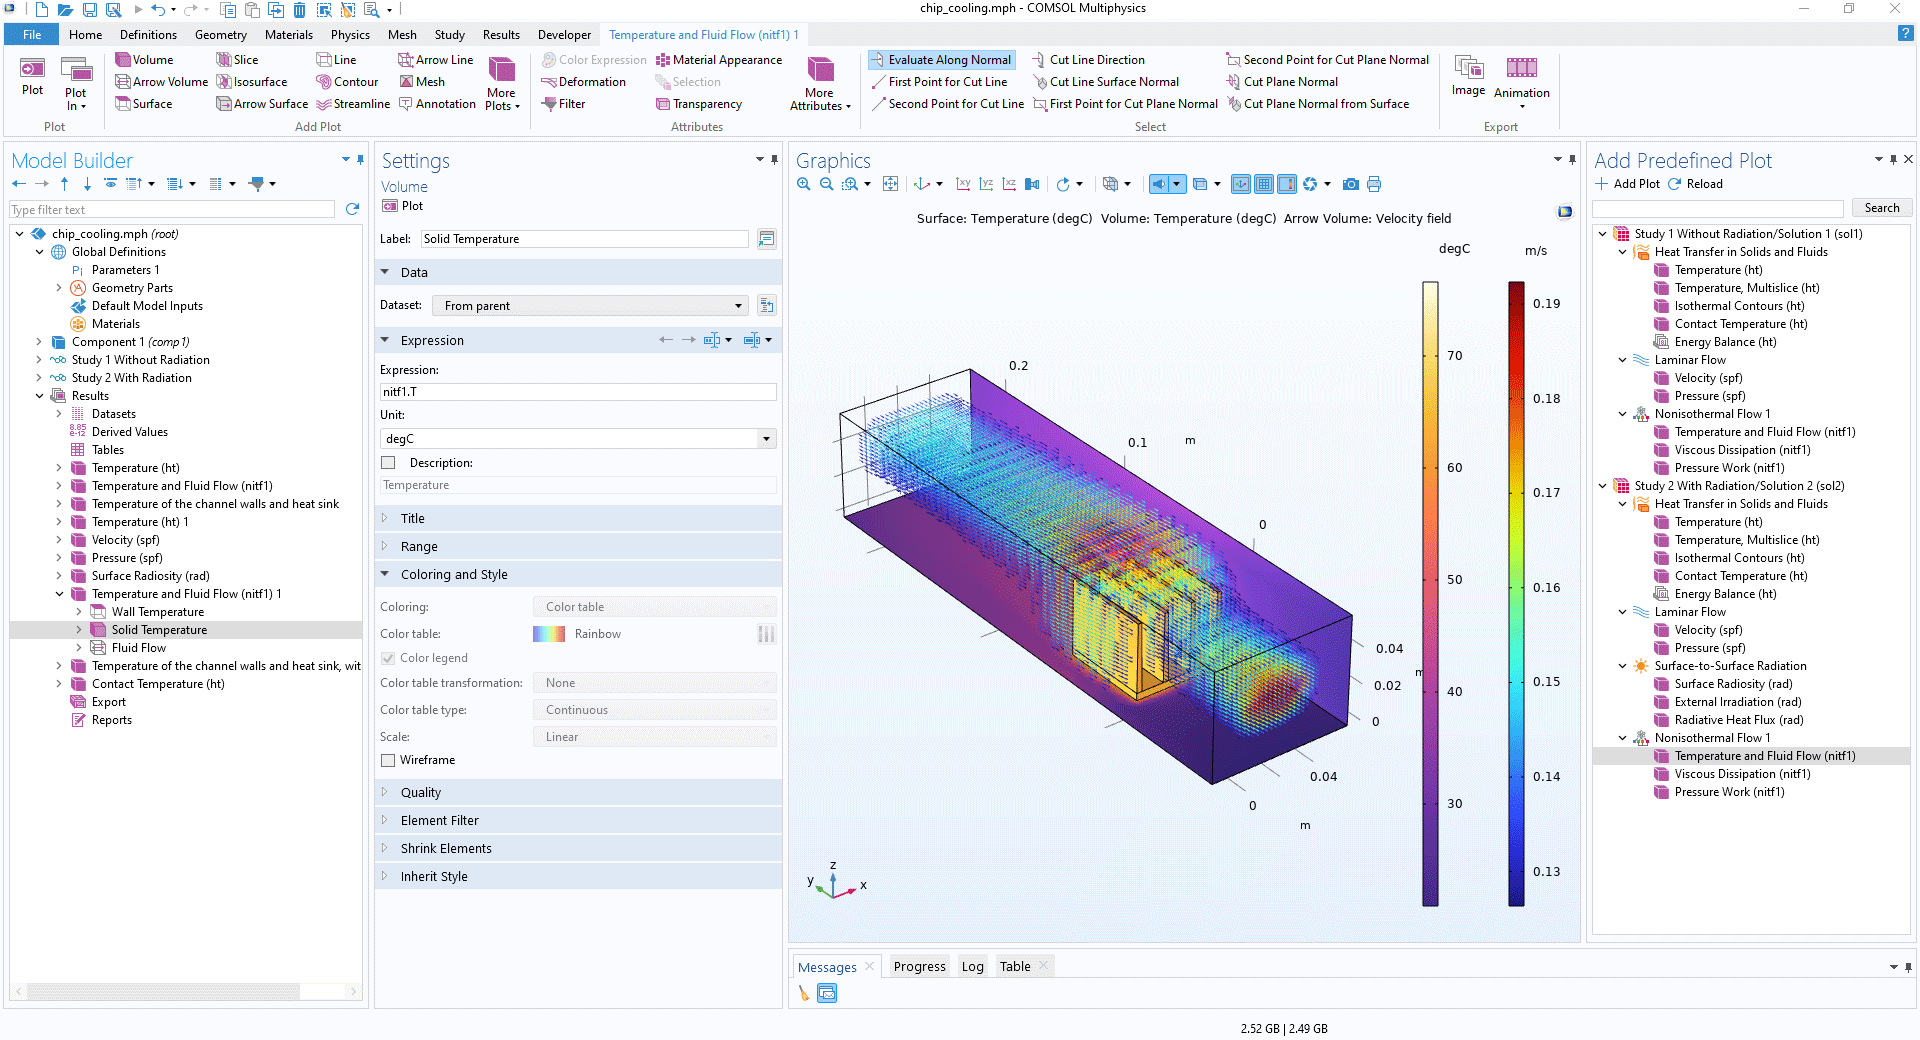 The COMSOL Multiphysics UI showing the Model Builder with a Volume node highlighted, the corresponding Settings window, and a battery chip cooling model in the Graphics window.